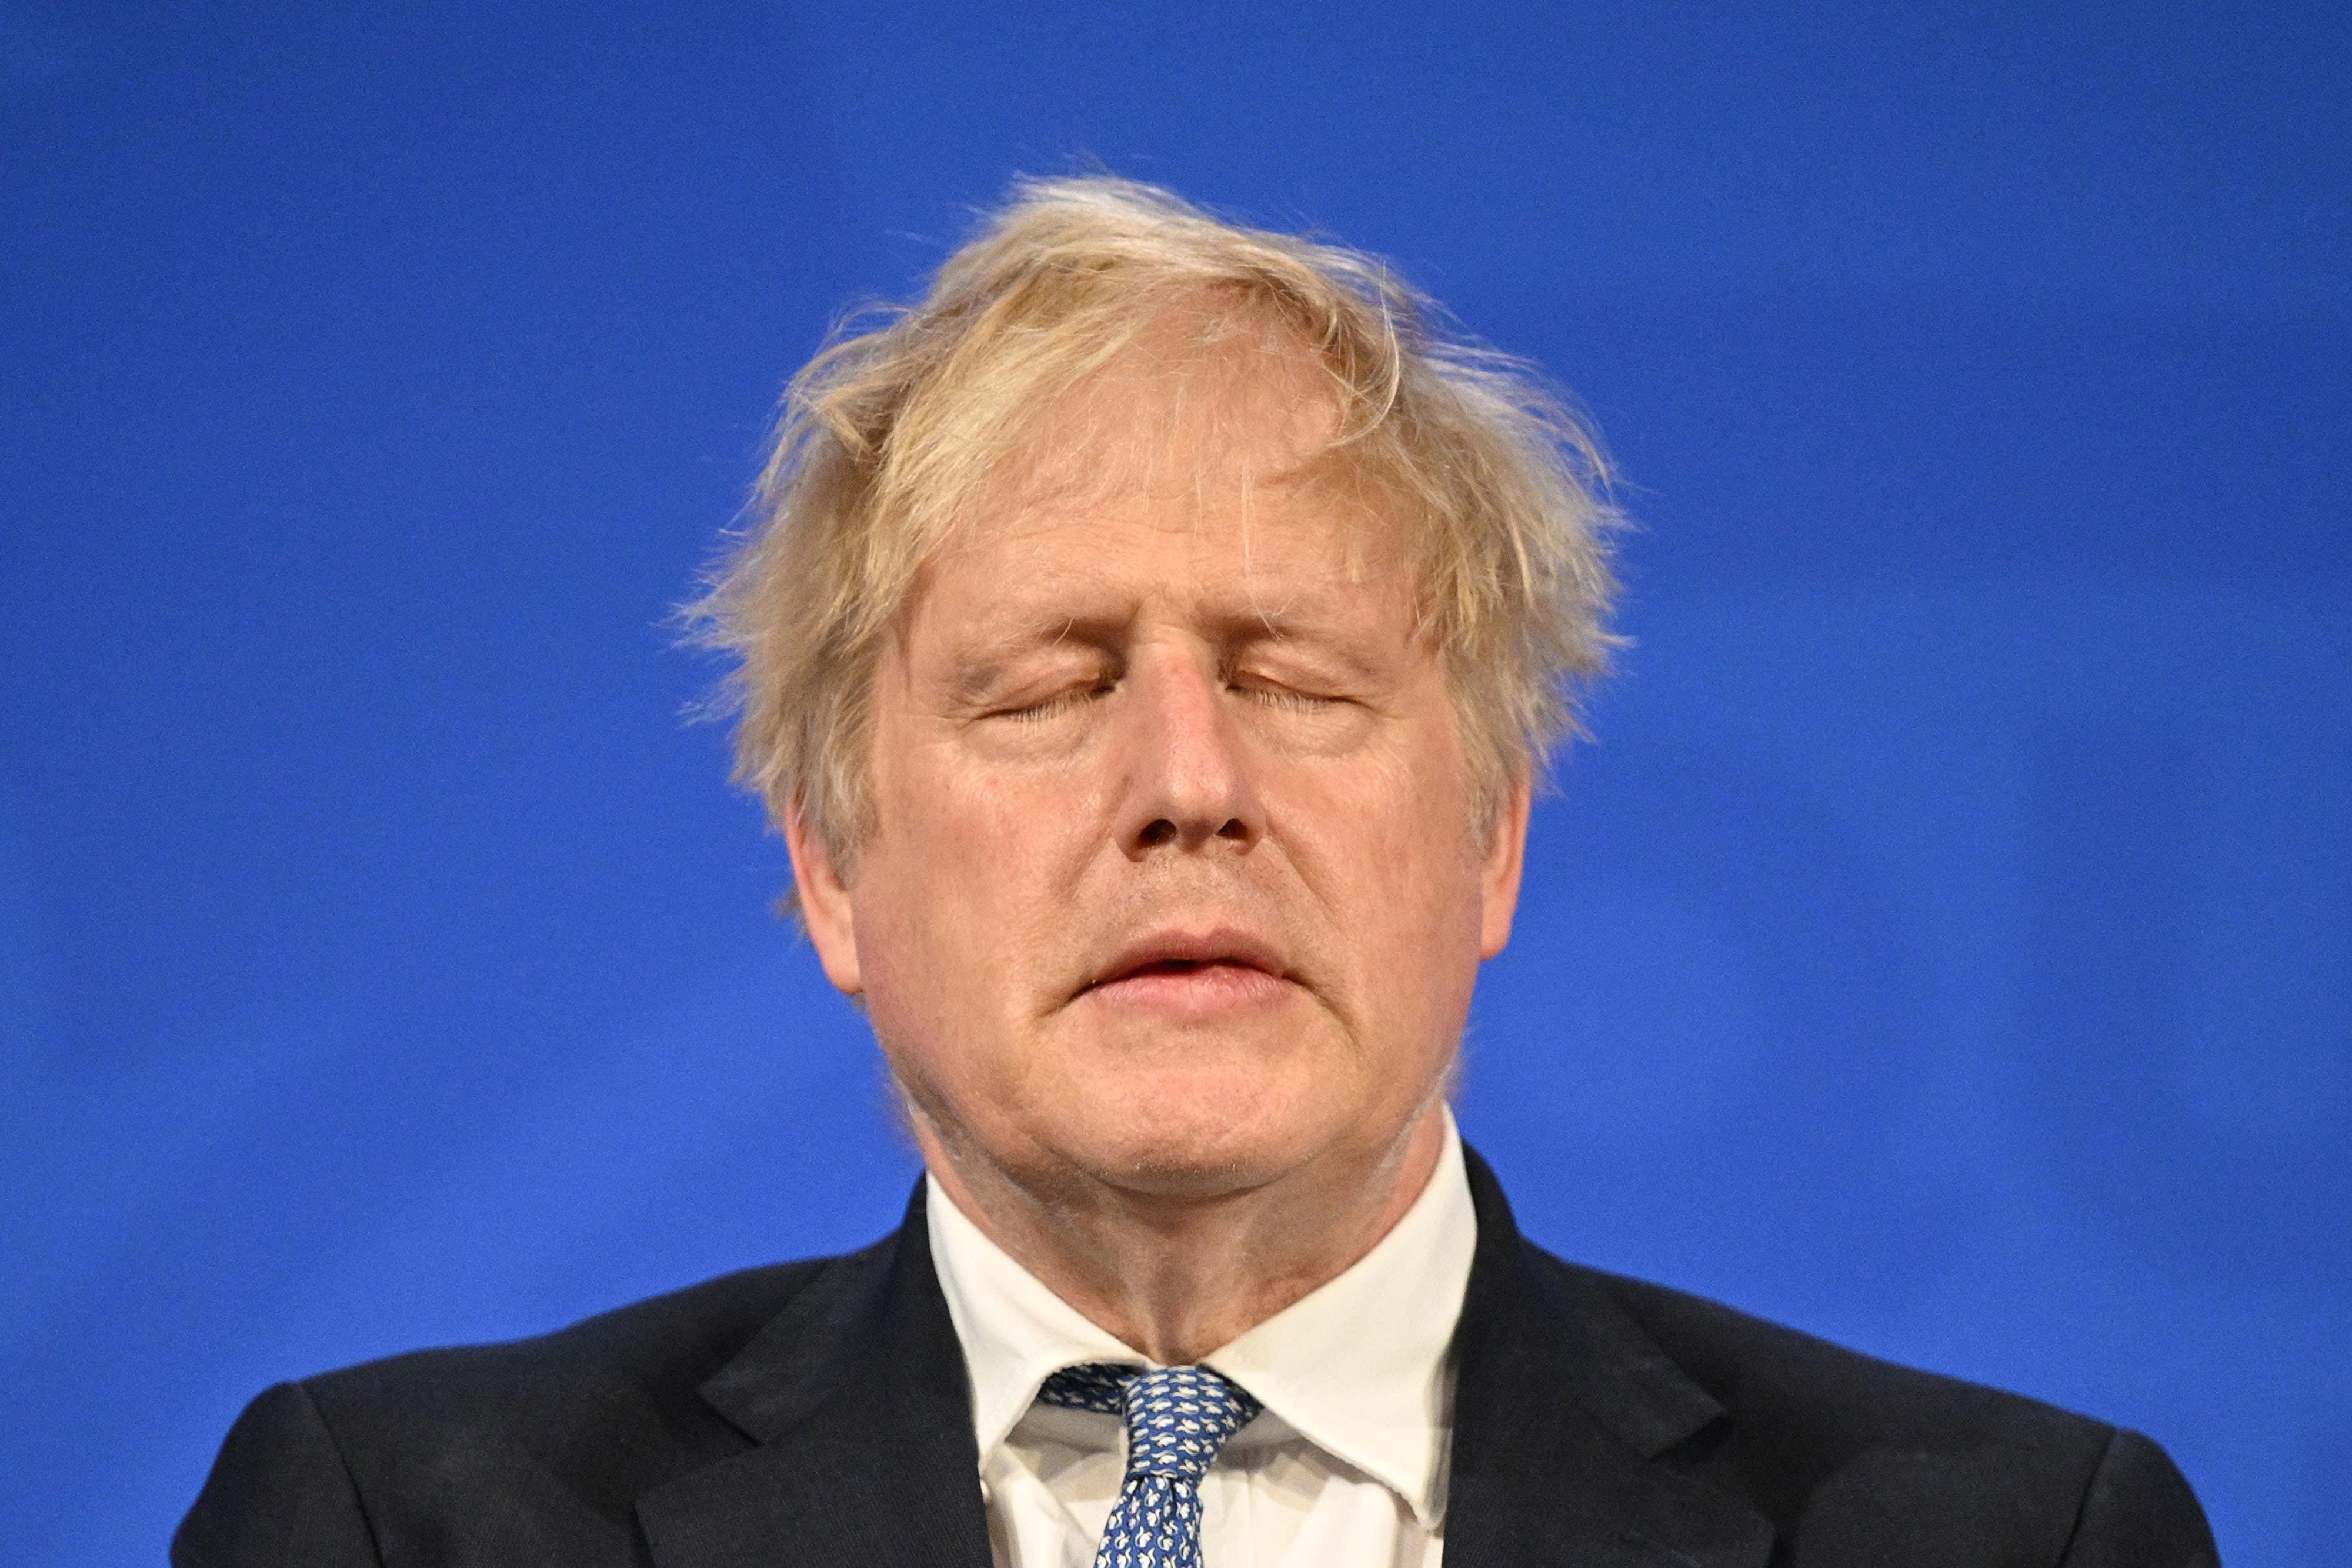 Boris Johnson stepped down as an MP last week in outrage at the outcome of an investigation into what he told Parliament about lockdon breaching parties at No 10